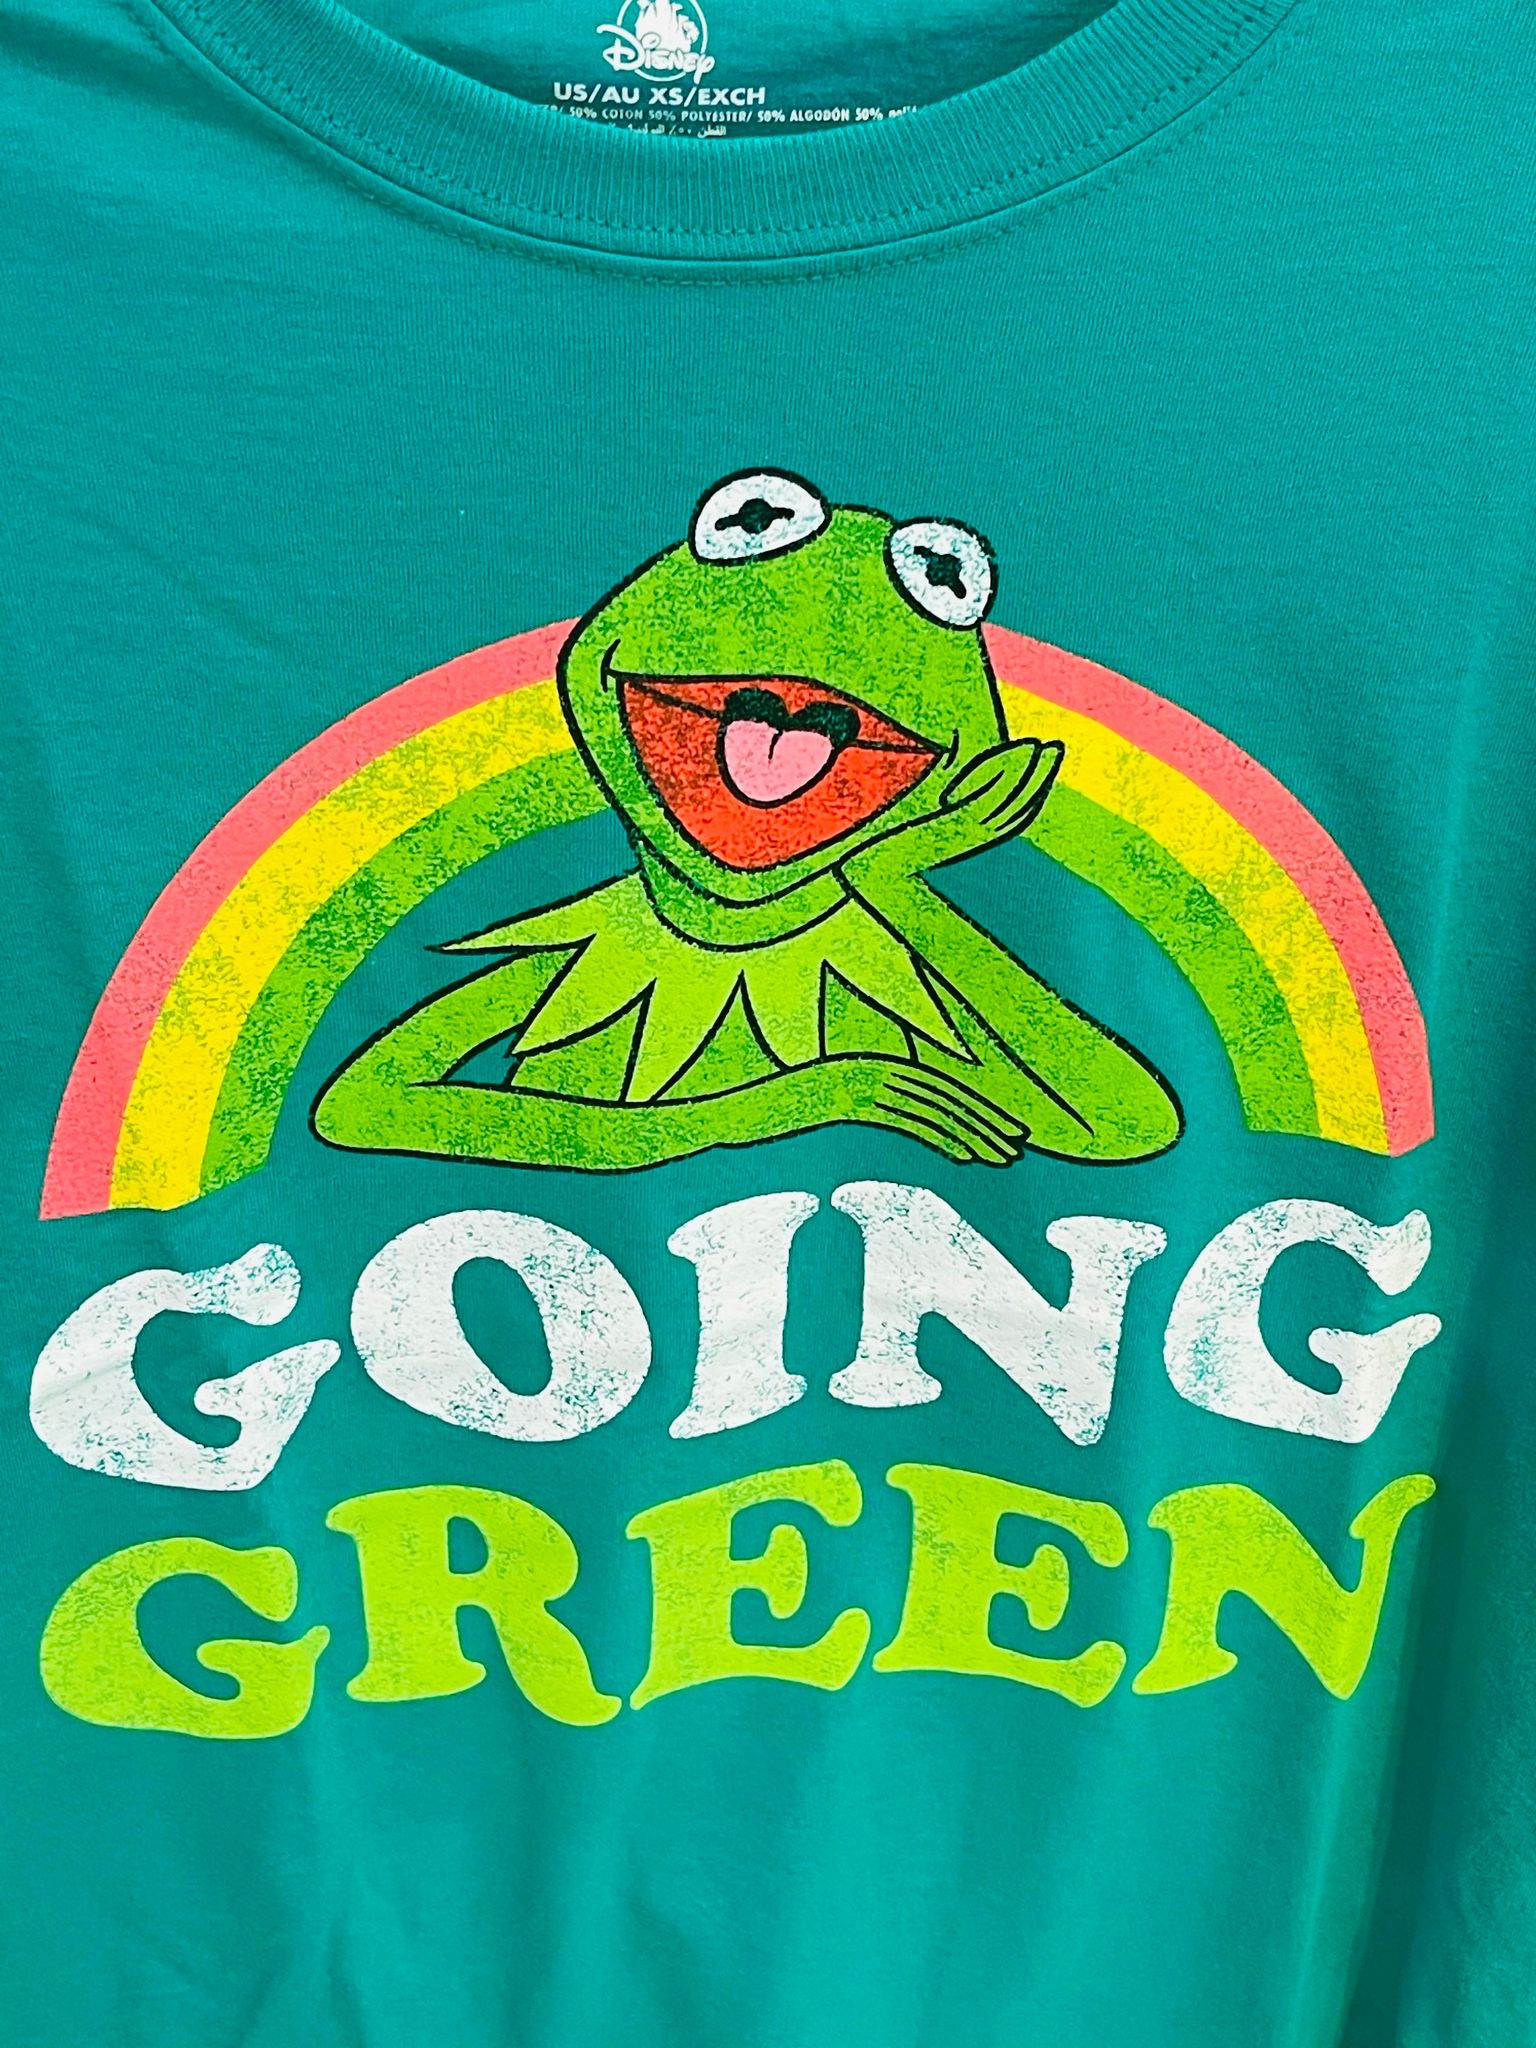 It's Easy Being Green With This Adorable Kermit Tee